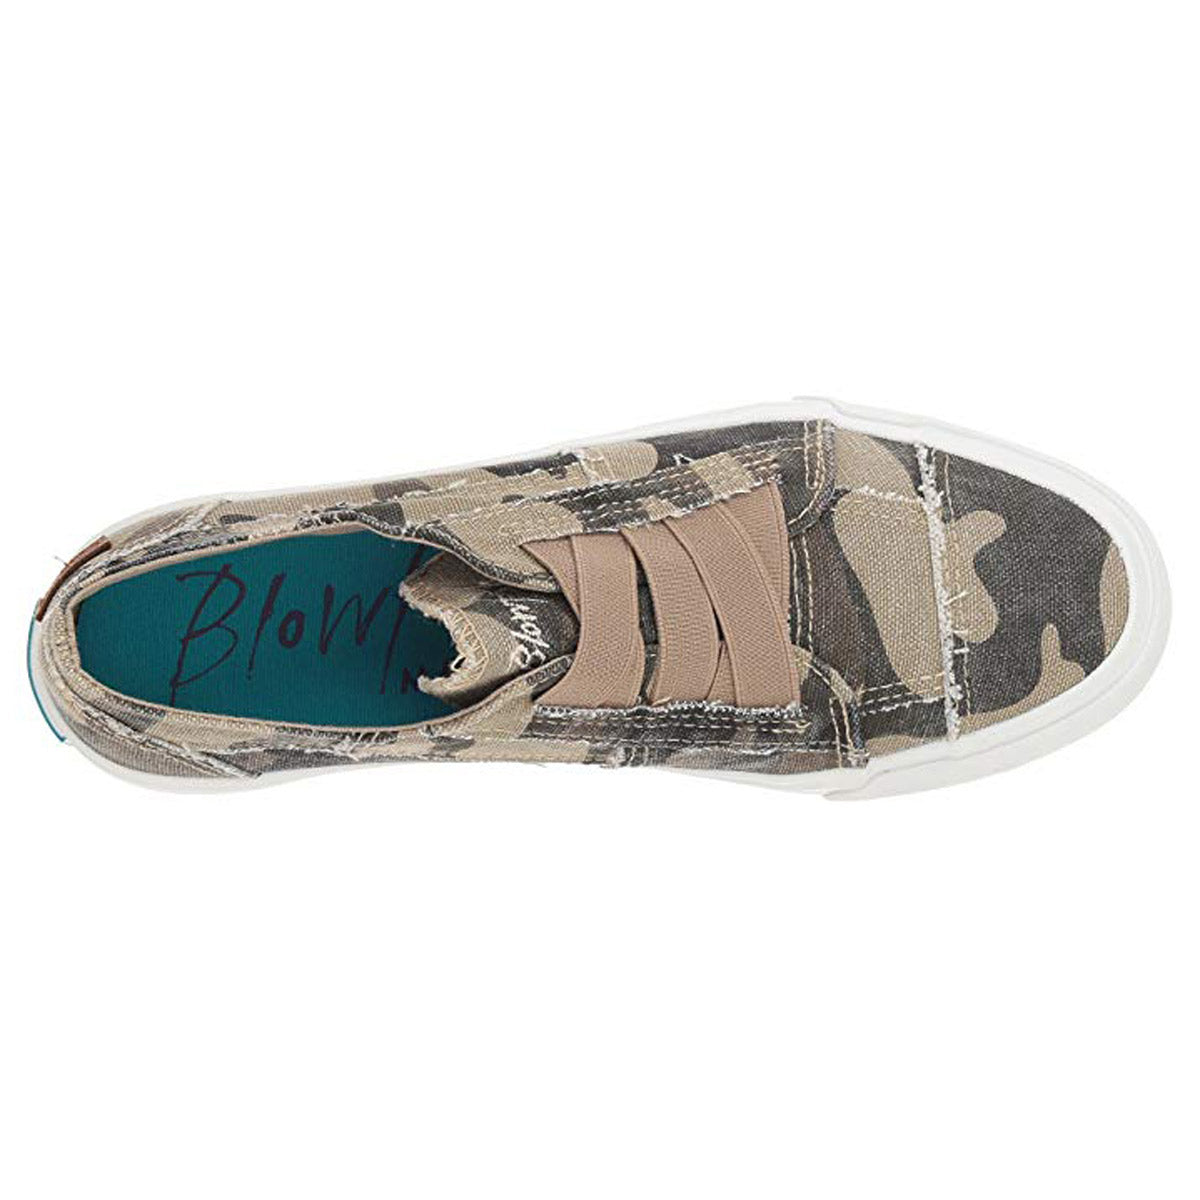 Blowfish Vegan slip-on shoe with a camouflage pattern, elastic side accents, and a blue insole.